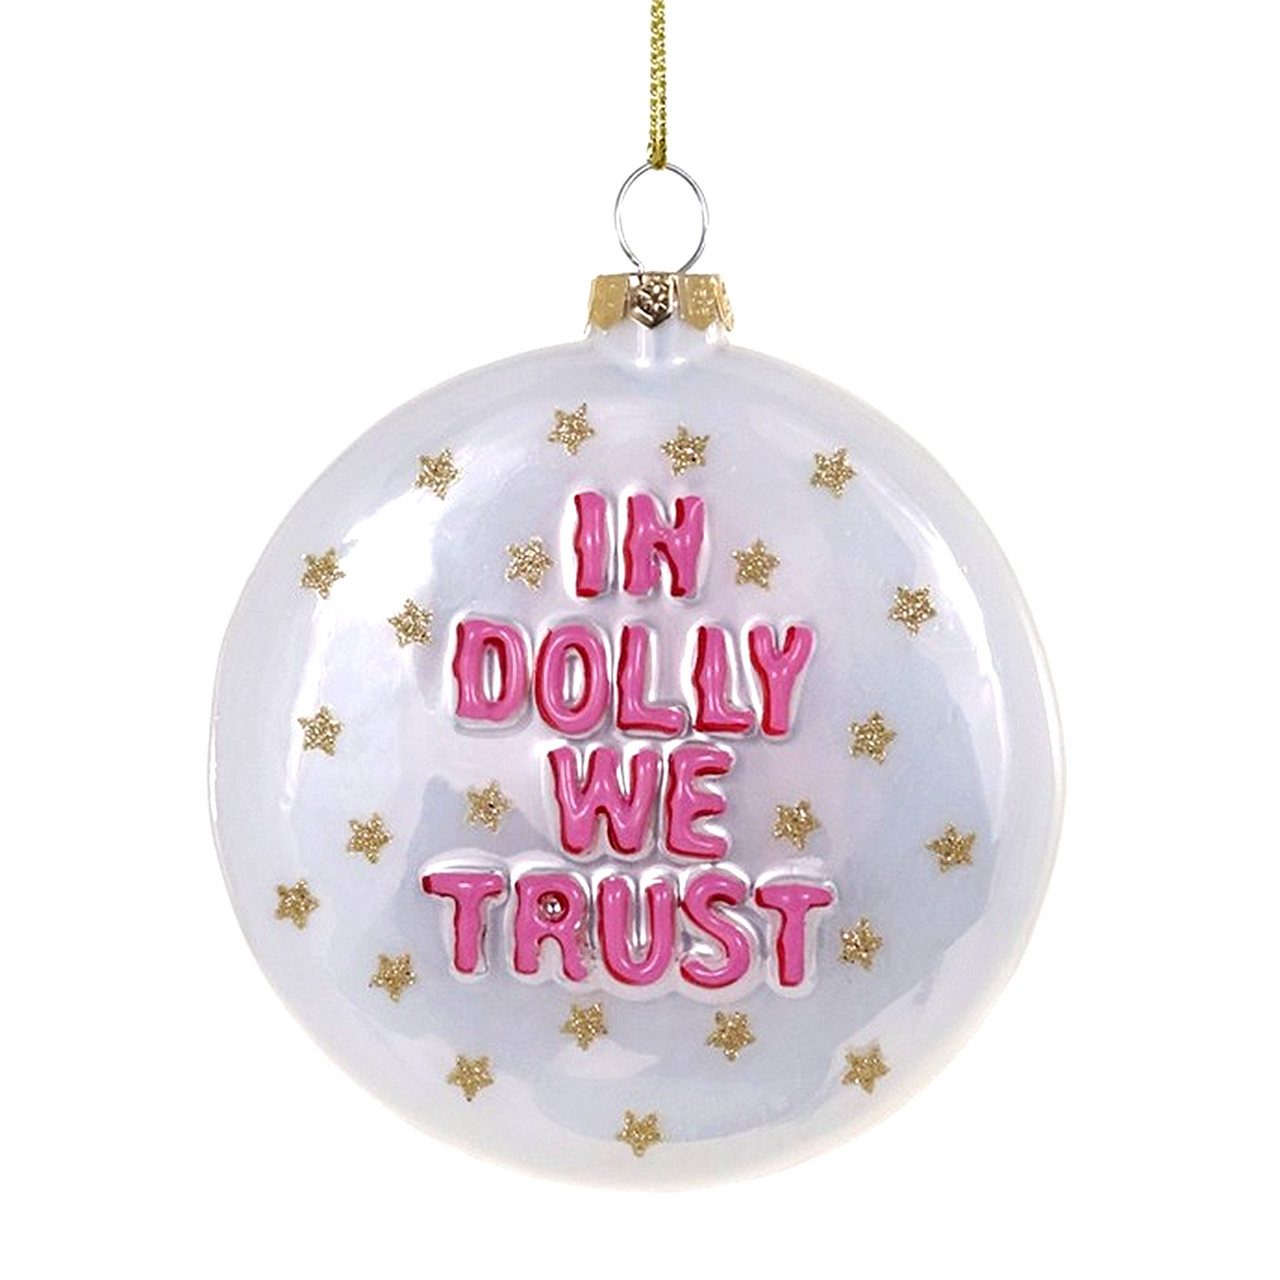 IN DOLLY WE TRUST GLASS ORNAMENT